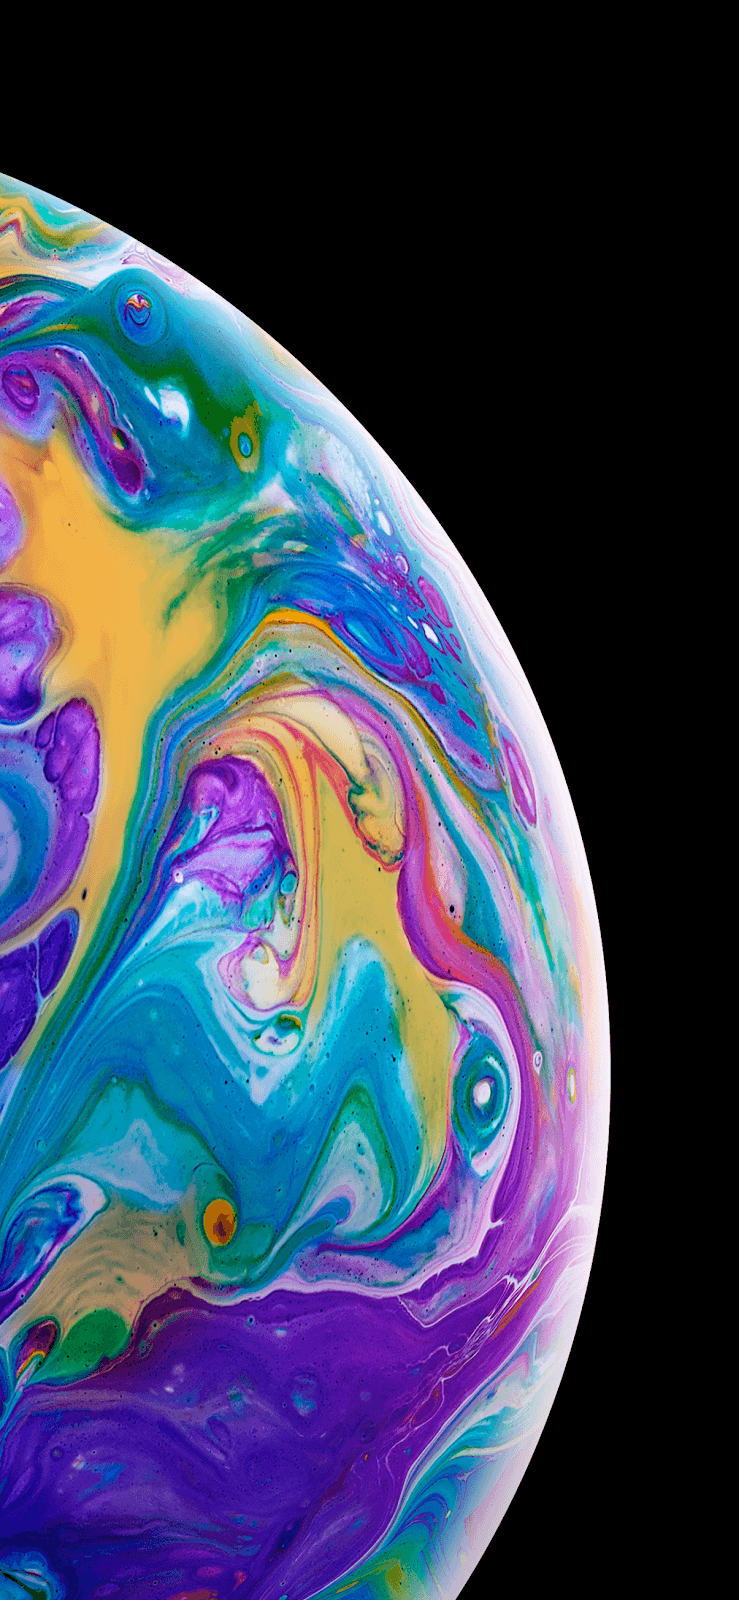 Bubble For iPhone Wallpapers - Wallpaper Cave